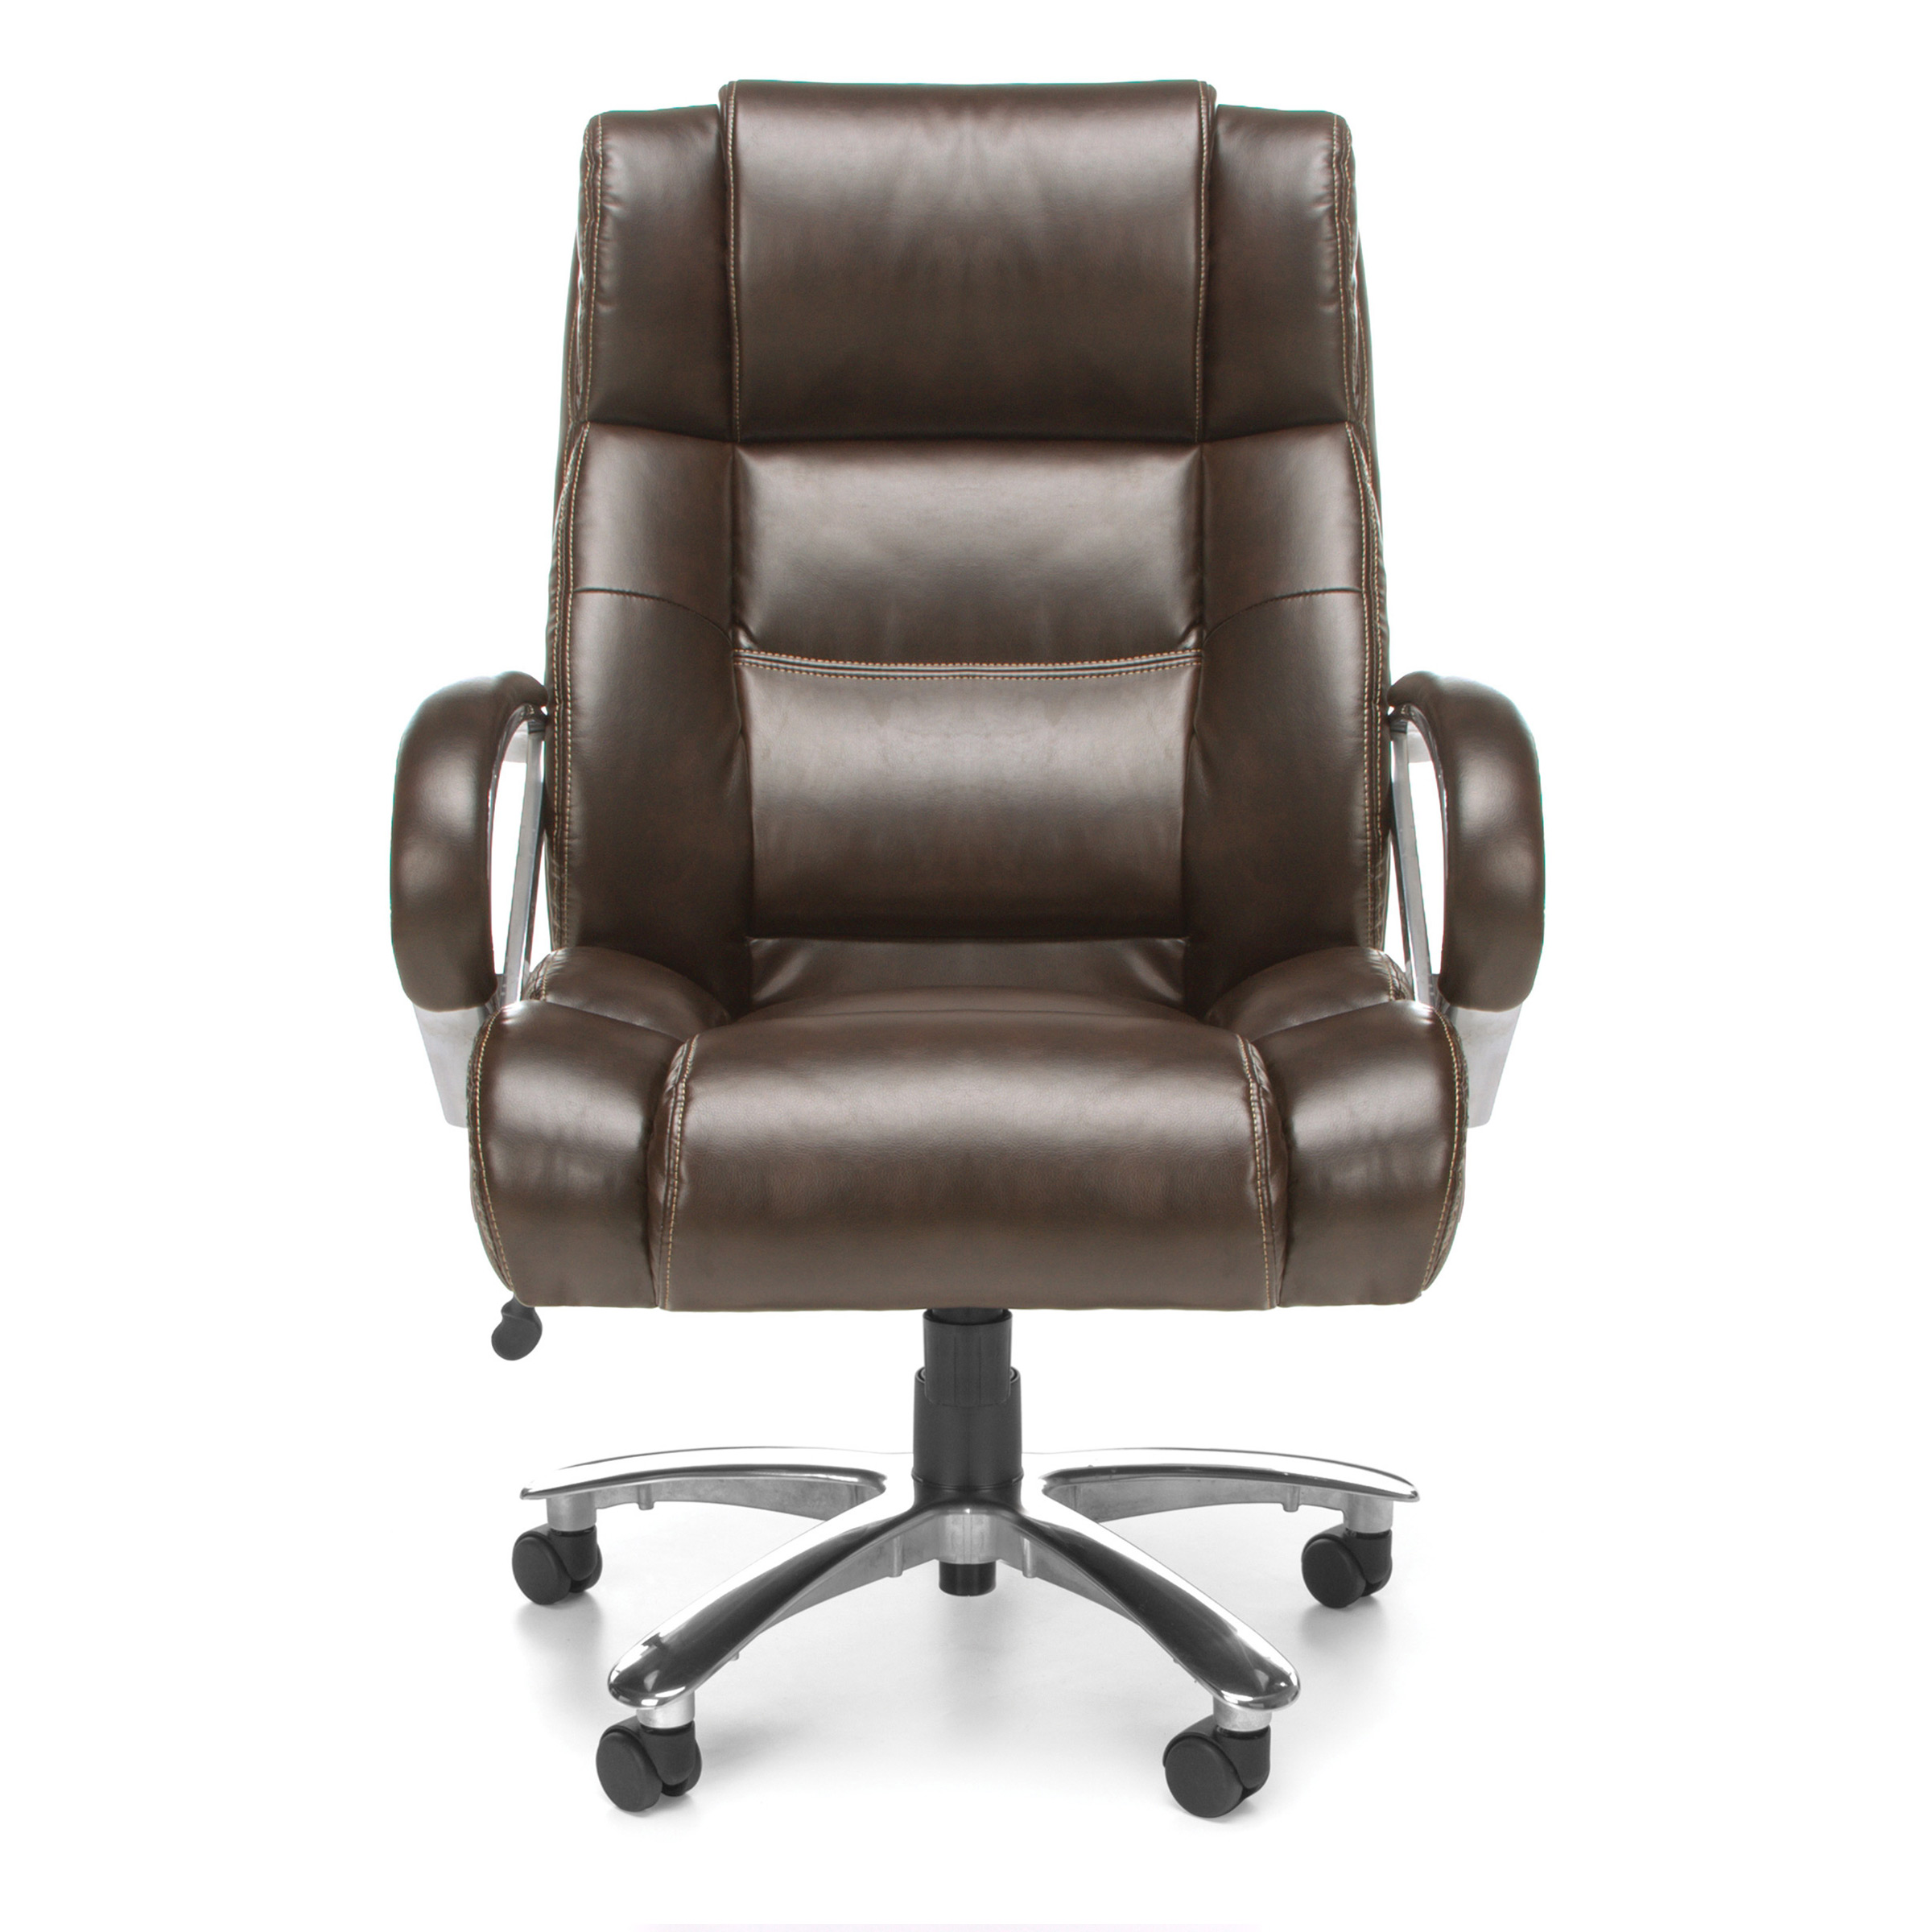 Office Chair For 500 Lbs HERCULES Series 500 lb